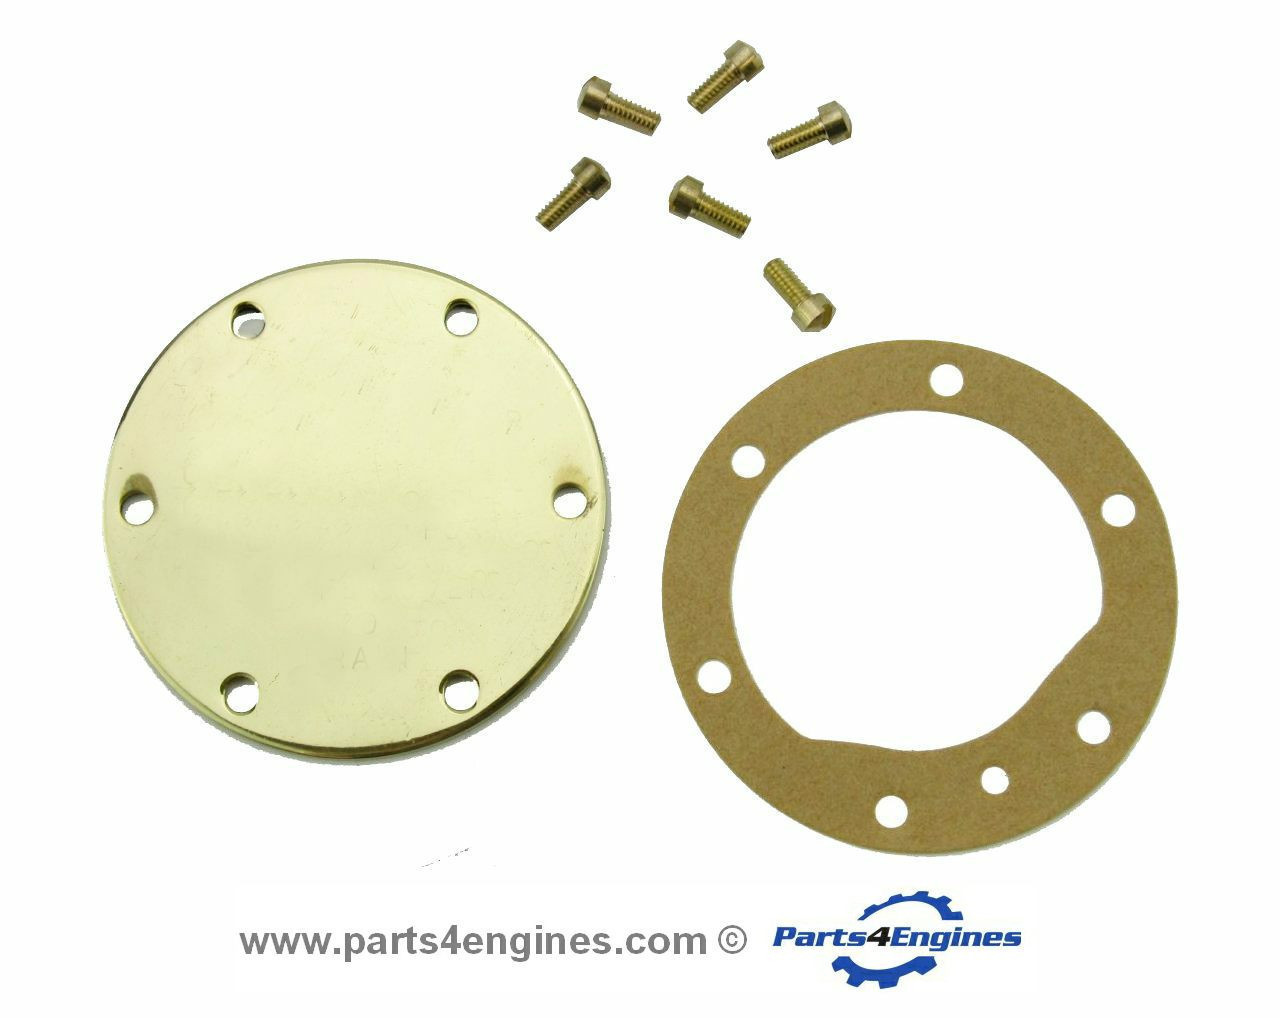 Perkins Prima M50 raw water pump end cover kit from parts4engines.com